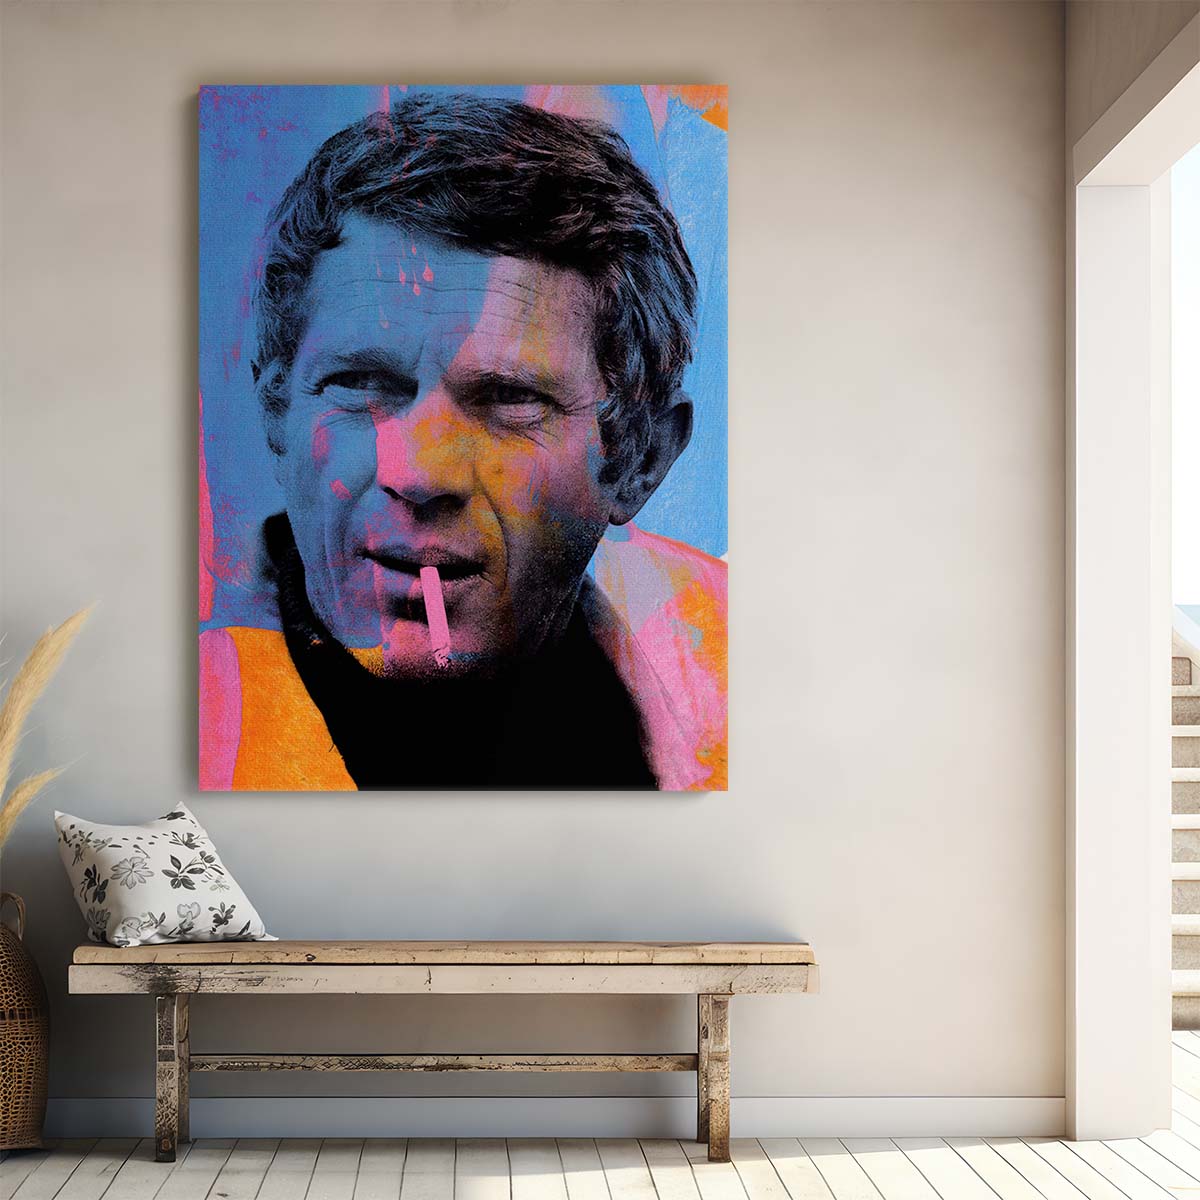 Steve McQueen Bright Colors Wall Art by Luxuriance Designs. Made in USA.